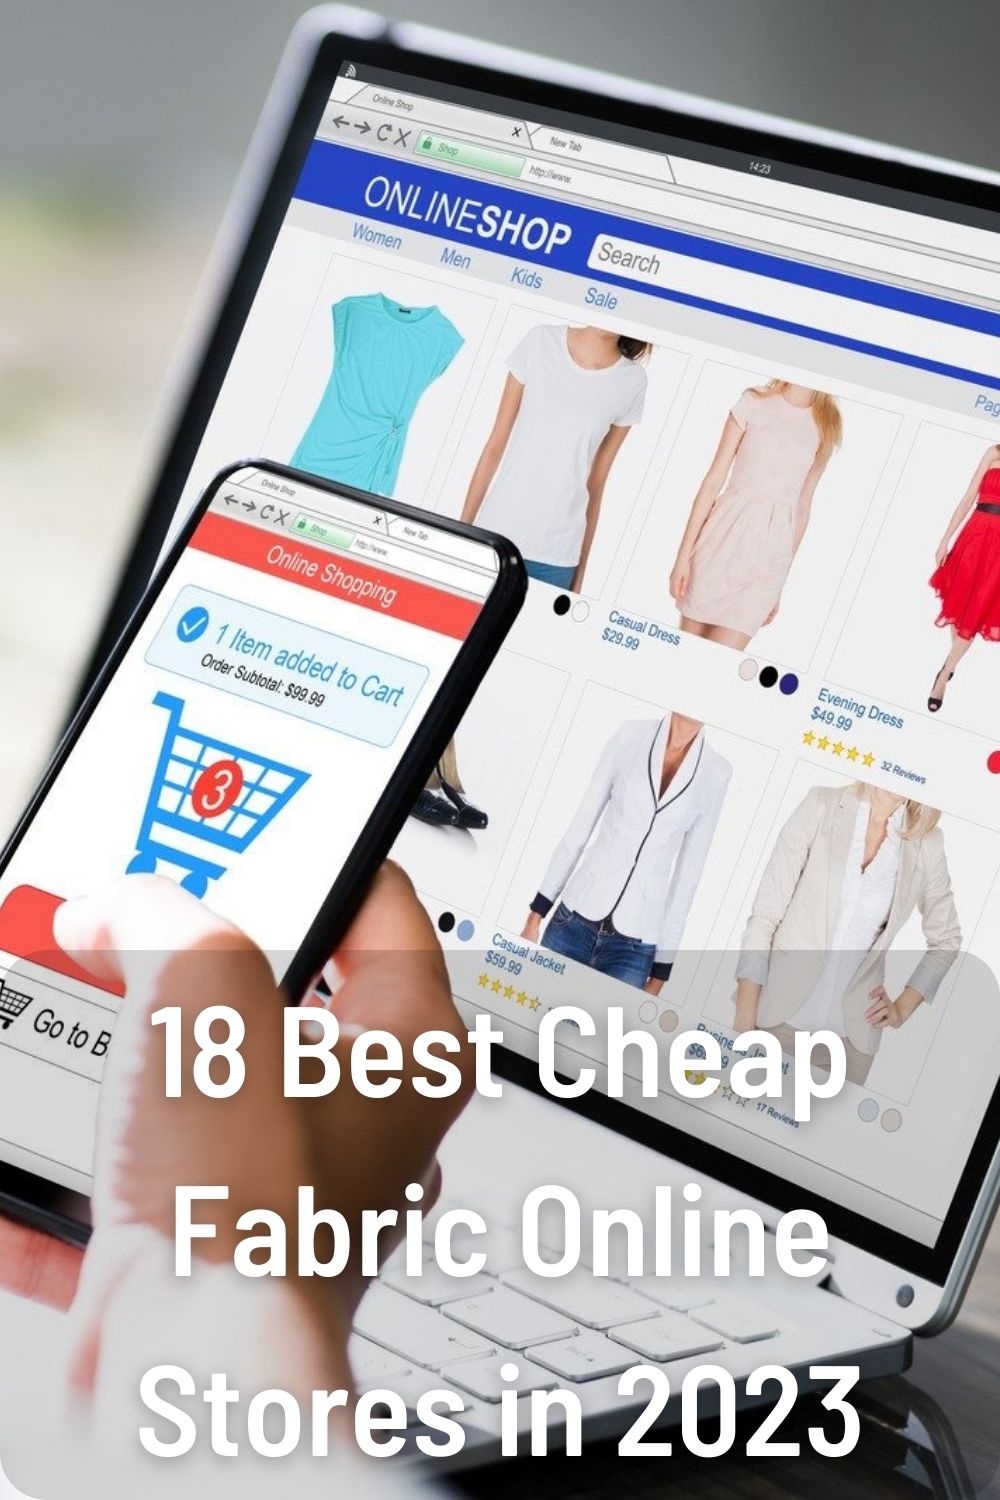 18 Best Cheap Fabric Online Stores in 2023